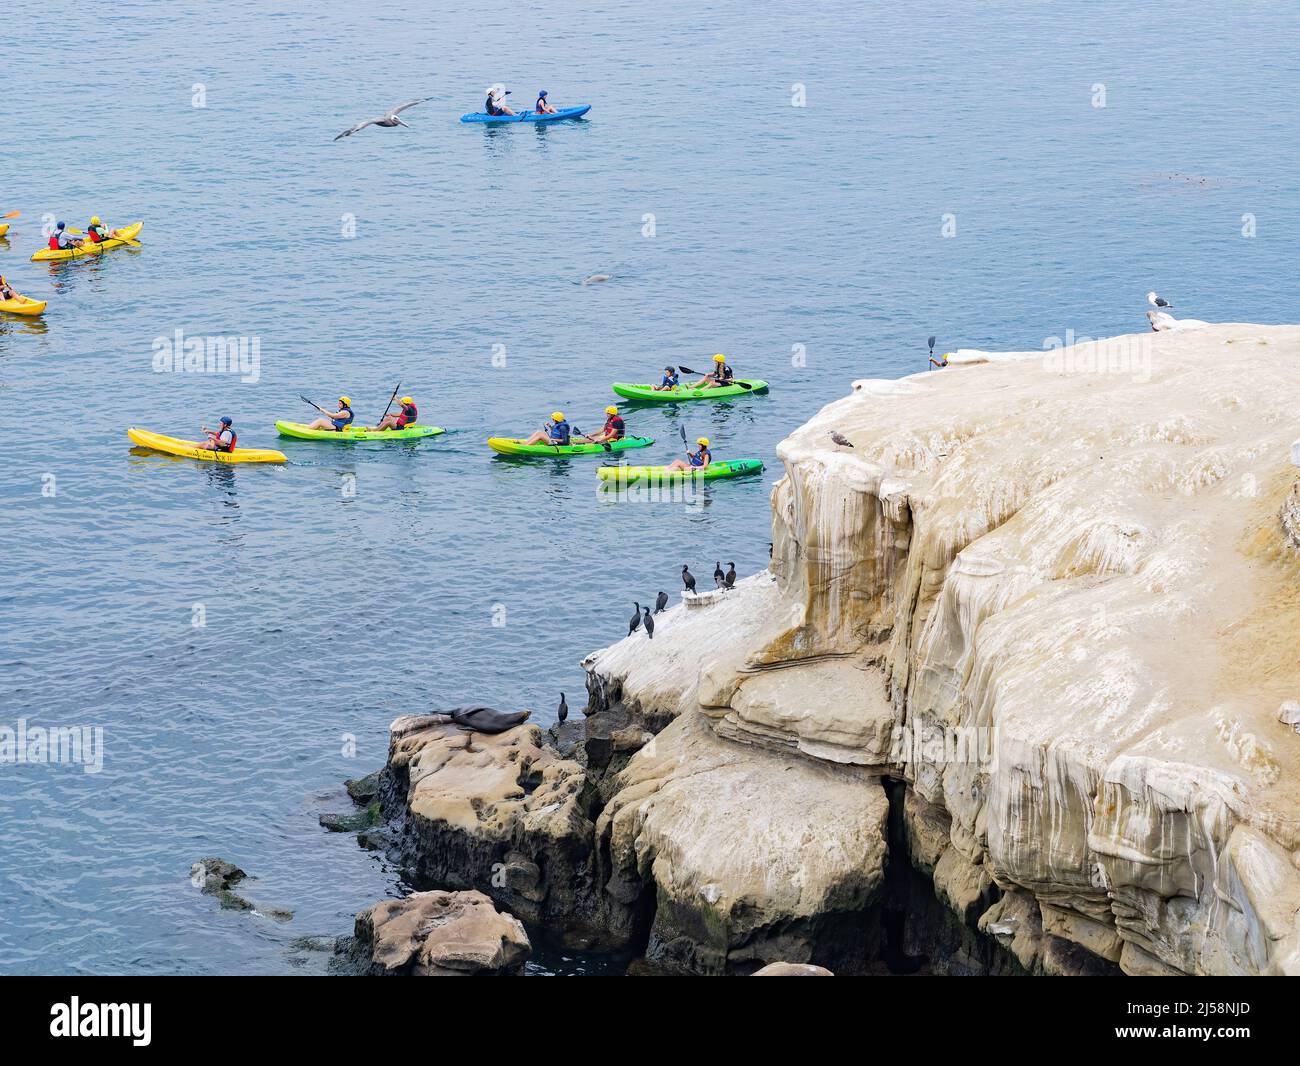 San Diego, AUG 2 2014 - Close up shot of many Cape cormorant and kayak near the famous La Jolla Cove Stock Photo